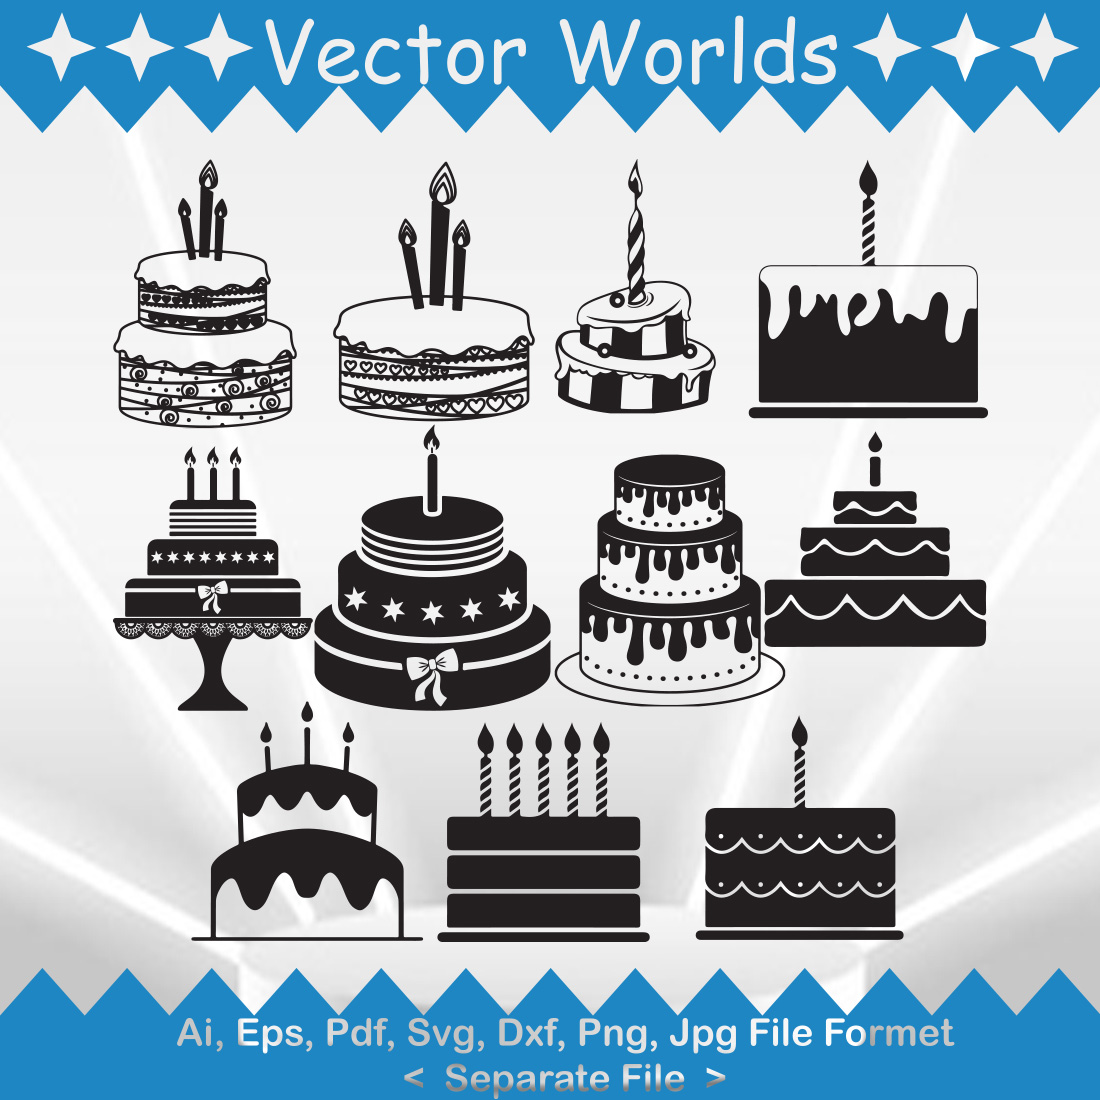 Pack of enchanting images of silhouettes of birthday cakes